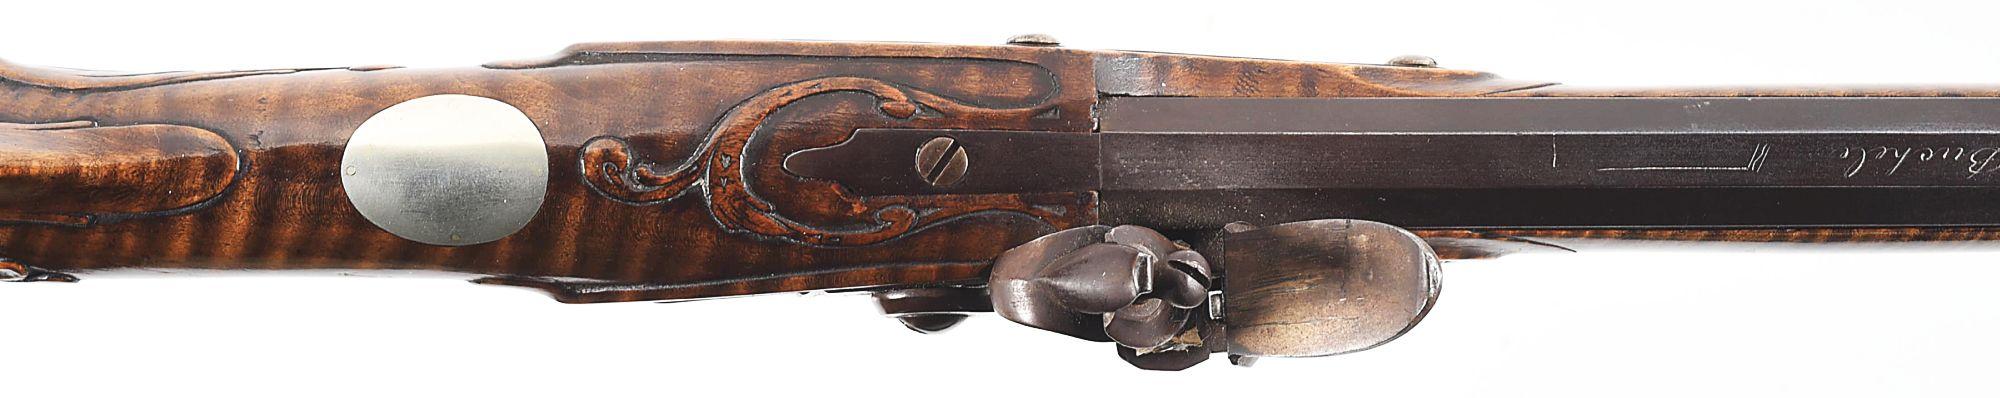 (A) SILVER INLAID AND RELIEF CARVED CONTEMPORARY KENTUCKY RIFLE BY WILLIAM BUCHELE.